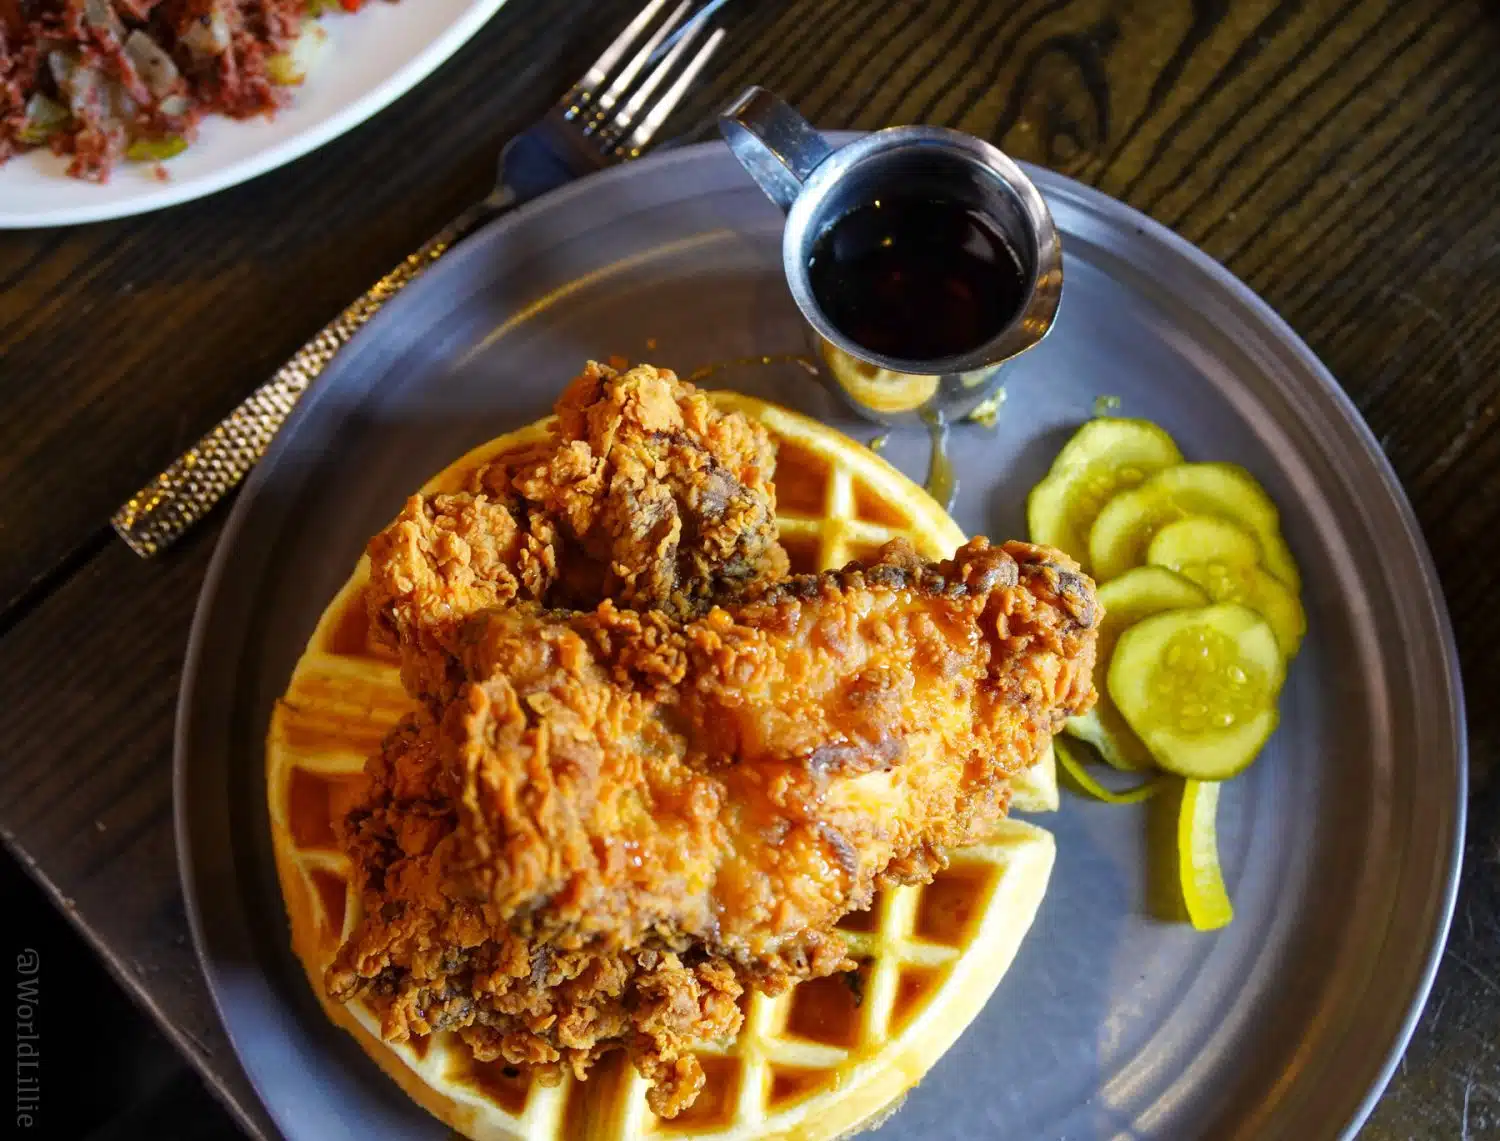 Chicken and waffles at Ledger!